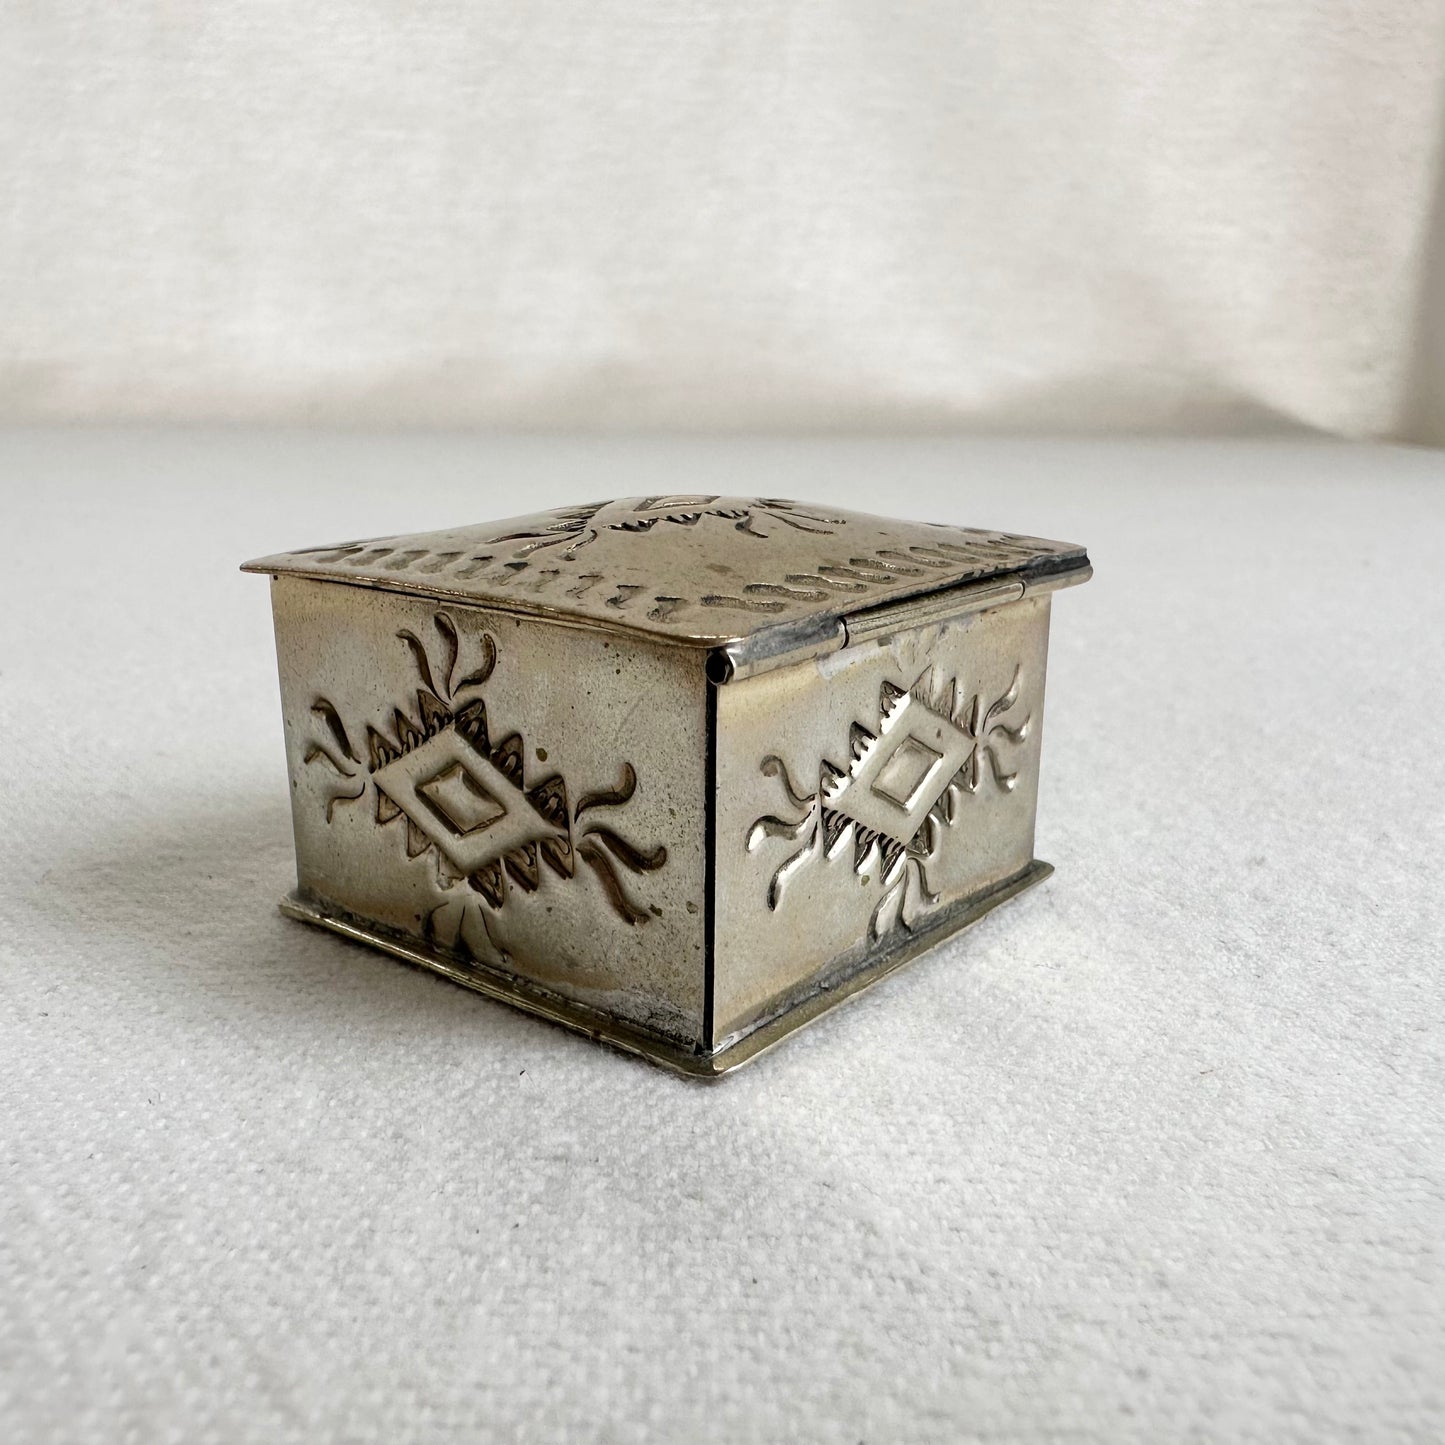 Small Engraved Silver Box